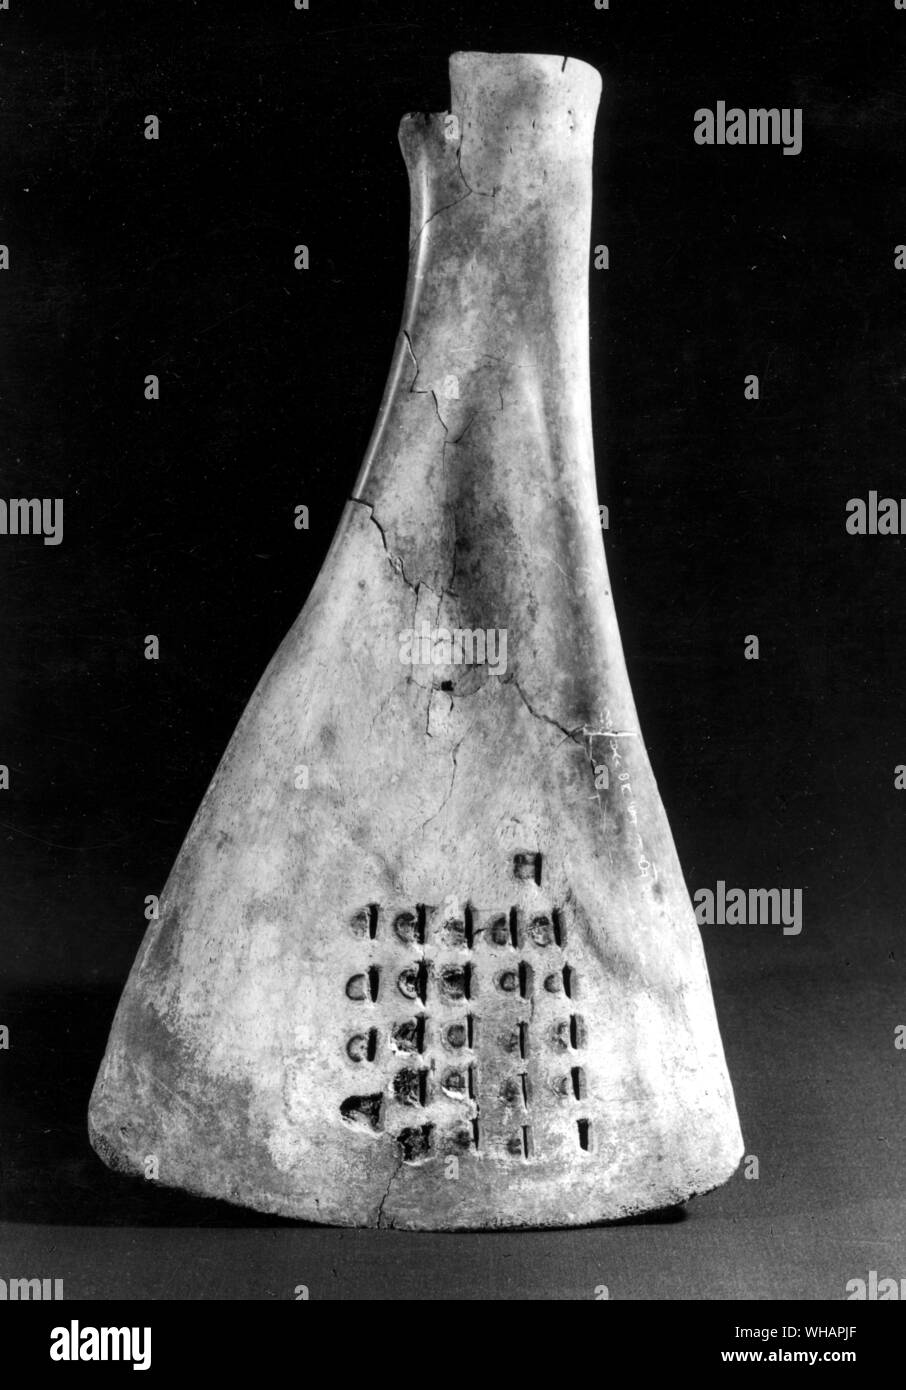 An ox scapula treated for oracle taking, excavated in 1971 at Anyang, Honan. The scapula shows small pits gouged with a chisel to the edge of which a heated bronze point has been applied. From the shape of the forked cracks so caused on the other side of the bone answers were read to the questions which are inscribed. Among the cracks a characteristic line with a short spur gave the shape for the ideograph pu 'to take an oracle'. The inscribed sentences the proper choice of animal victims for sacrifice to ancestors denoted by the number of a day (their offering day) in the ten day cycle. The Stock Photo